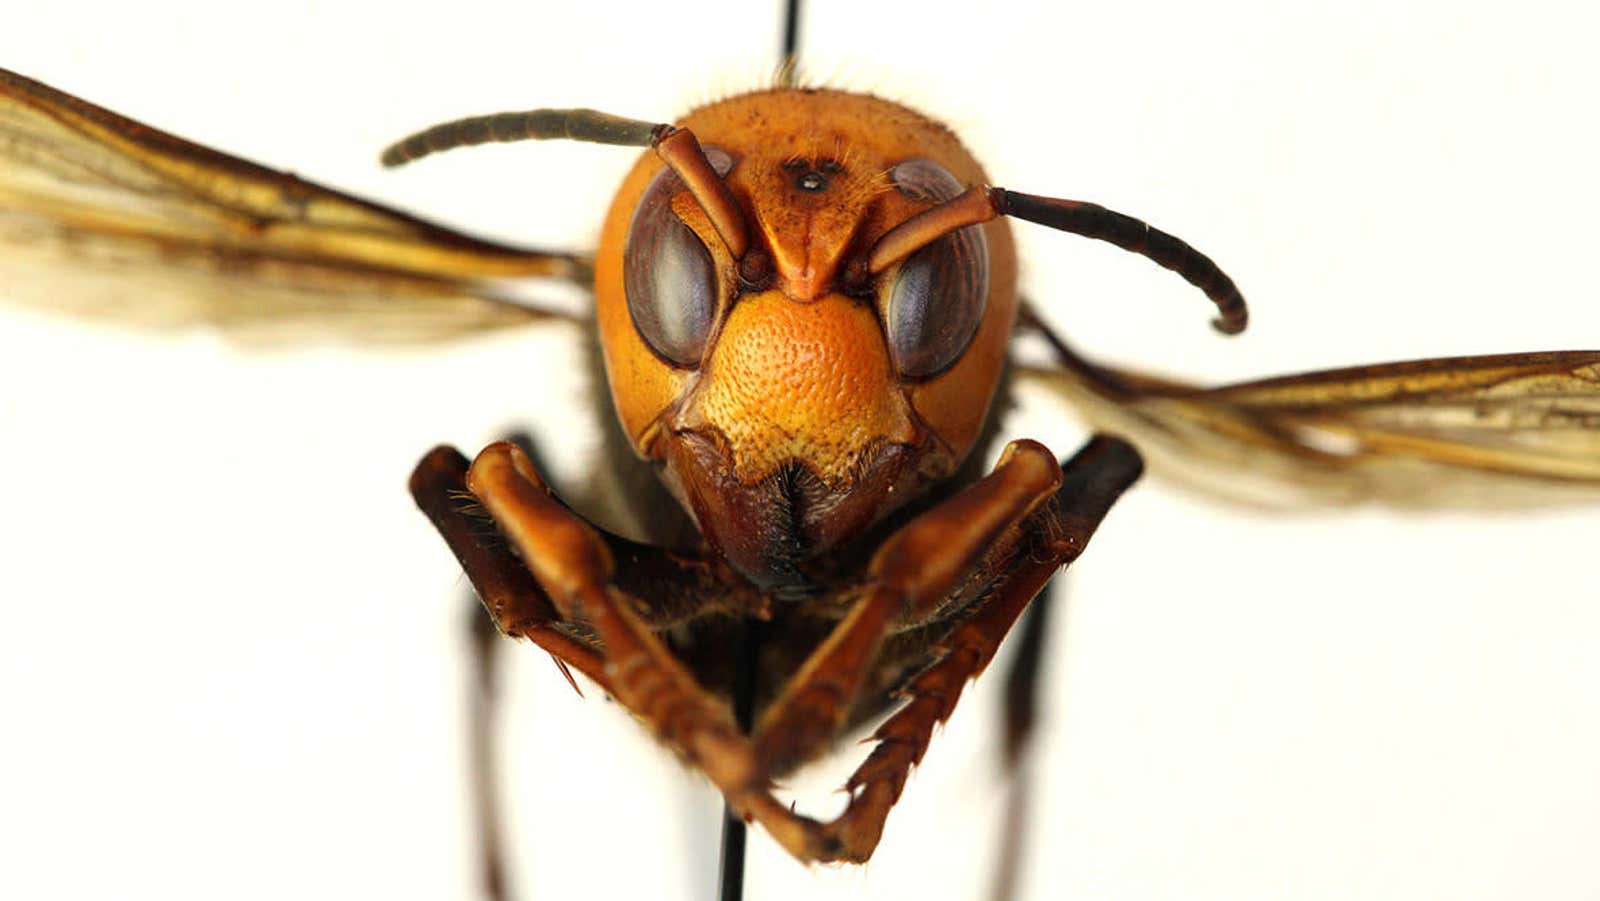 An Asian Giant Hornet up close and personal. (Photo: Washington State Department of Agriculture)